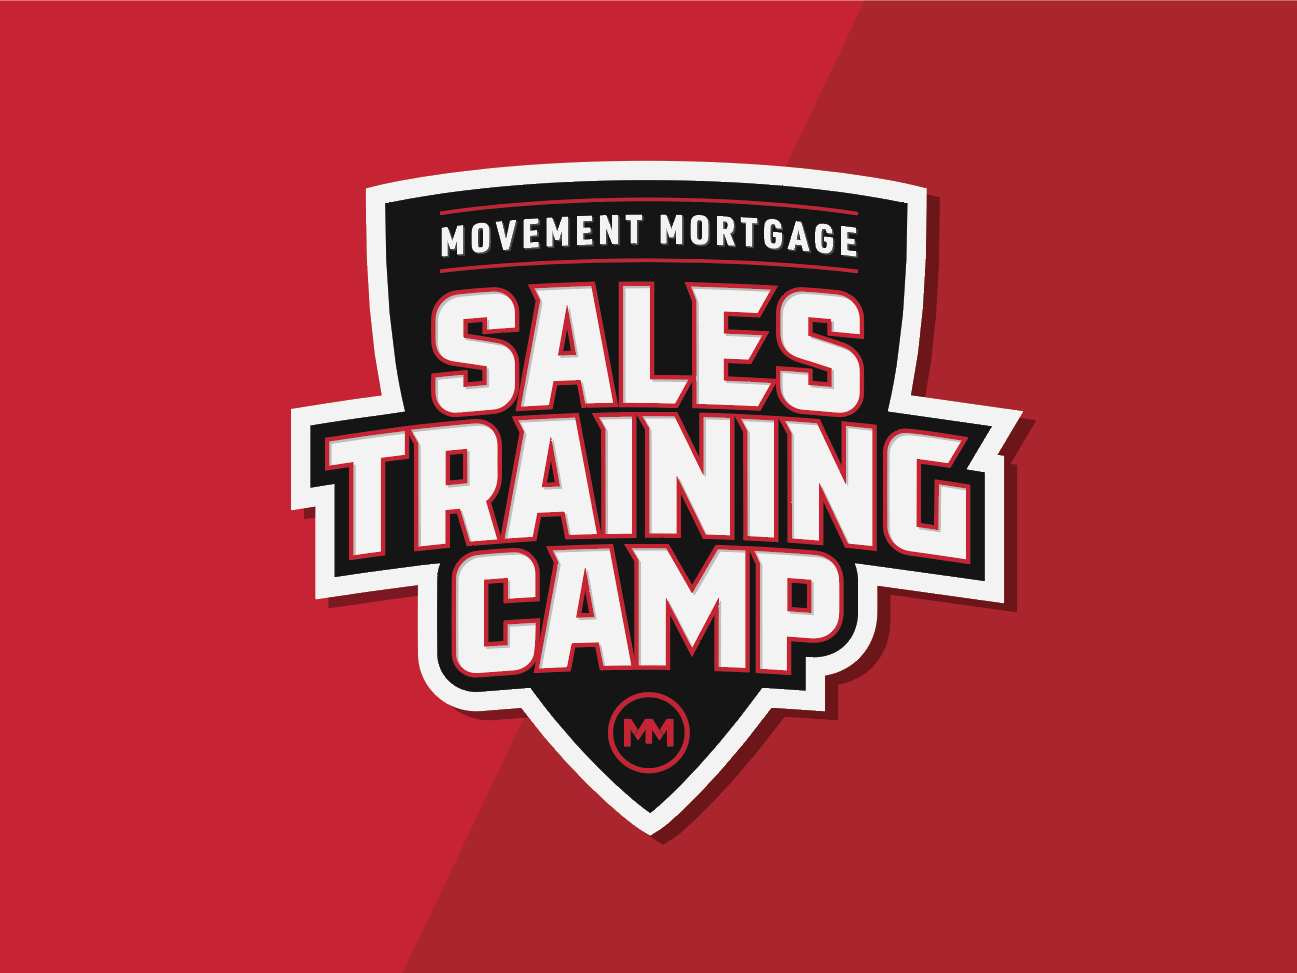 Training Camp Logo - MM Sales Training Camp Logo by Eric Parks | Dribbble | Dribbble